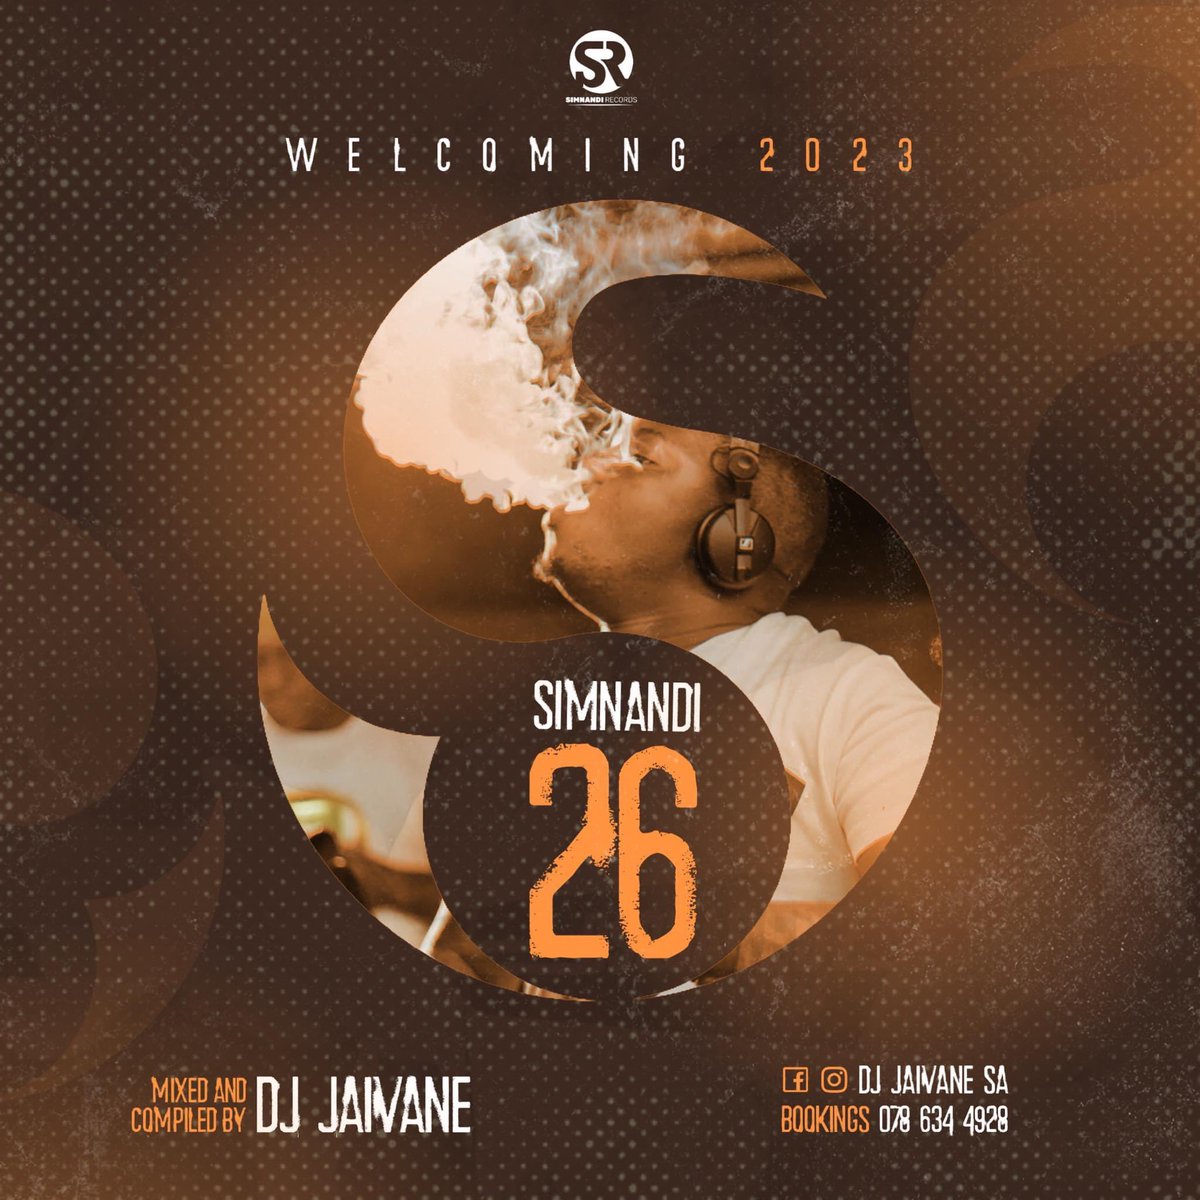 Incase You’ve Missed it!!

Simnandi Vol 26 (Welcoming 2023) ..Out Now!🔥🔥🔞 Enjoy..

Link 1 ANDROID : hearthis.at/djy-jaivane/si…

Link 2 APPLE PODCAST: podcasts.apple.com/us/podcast/djy…

Link 3 YOUTUBE: youtu.be/PKR_R8UnGqg

#OwnLaneBoy🛣️🐘 #SVol26_Welcoming2023